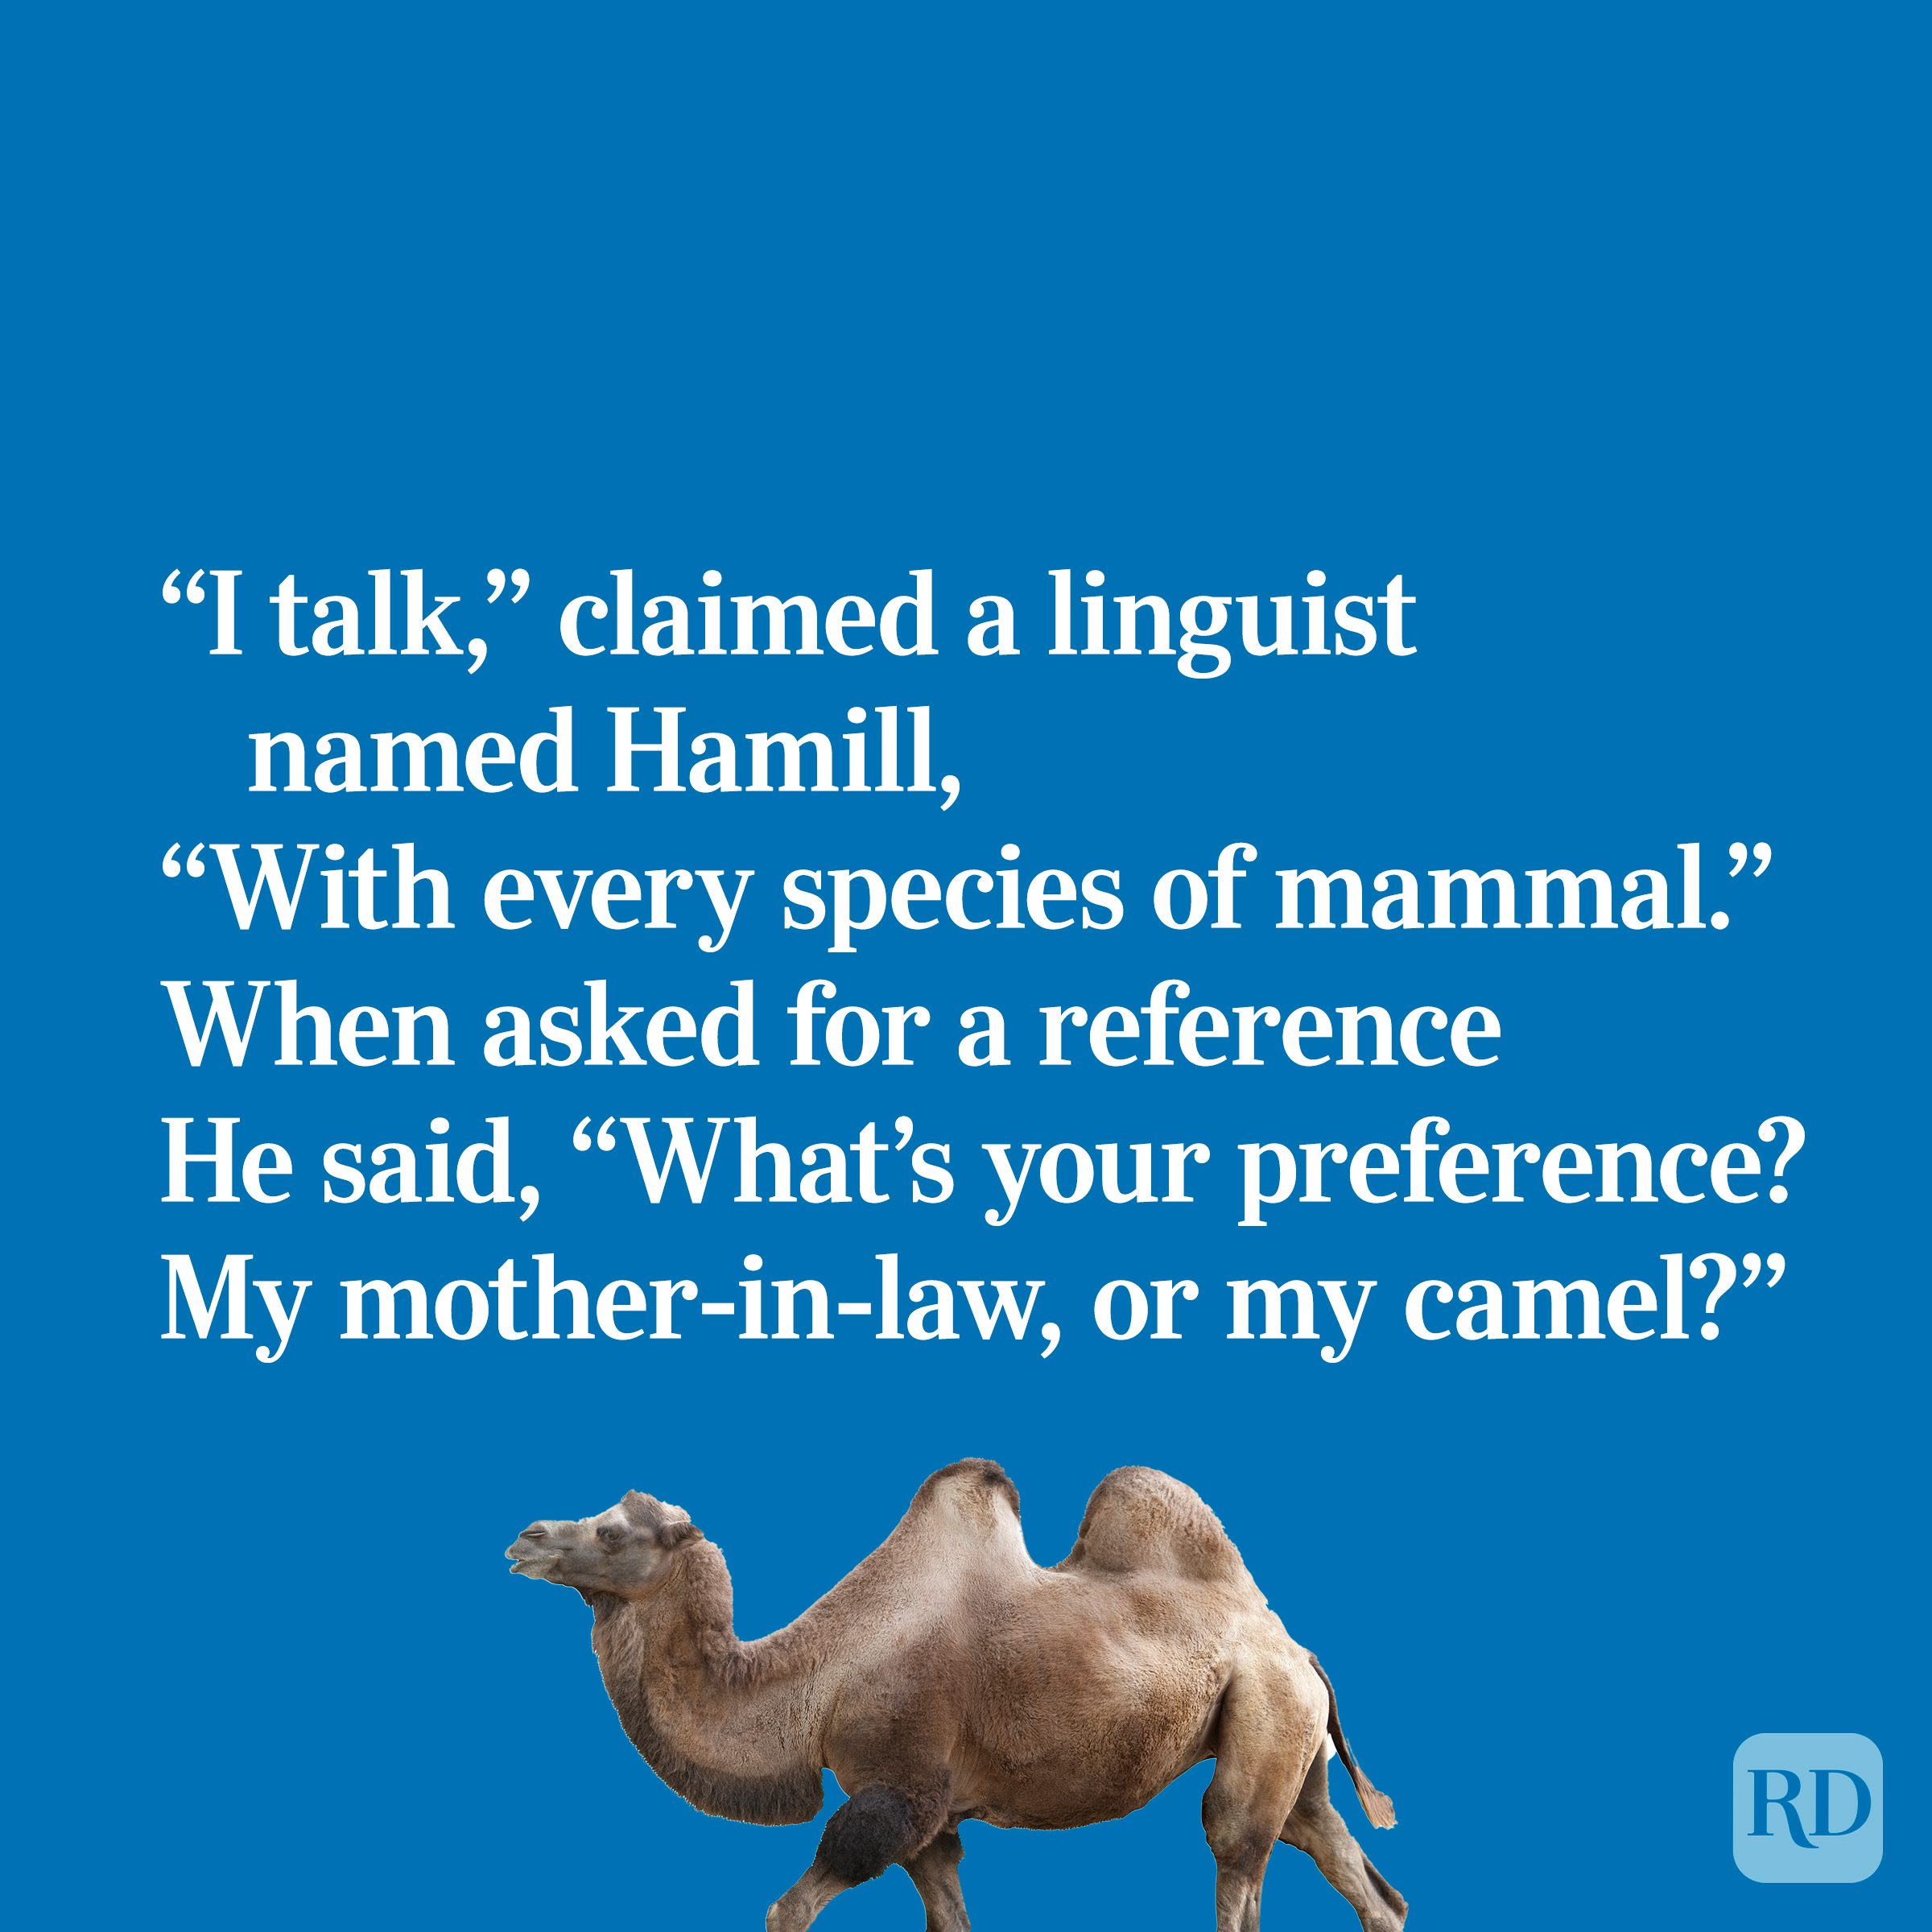 Quirky limerick about a linguist and his camel